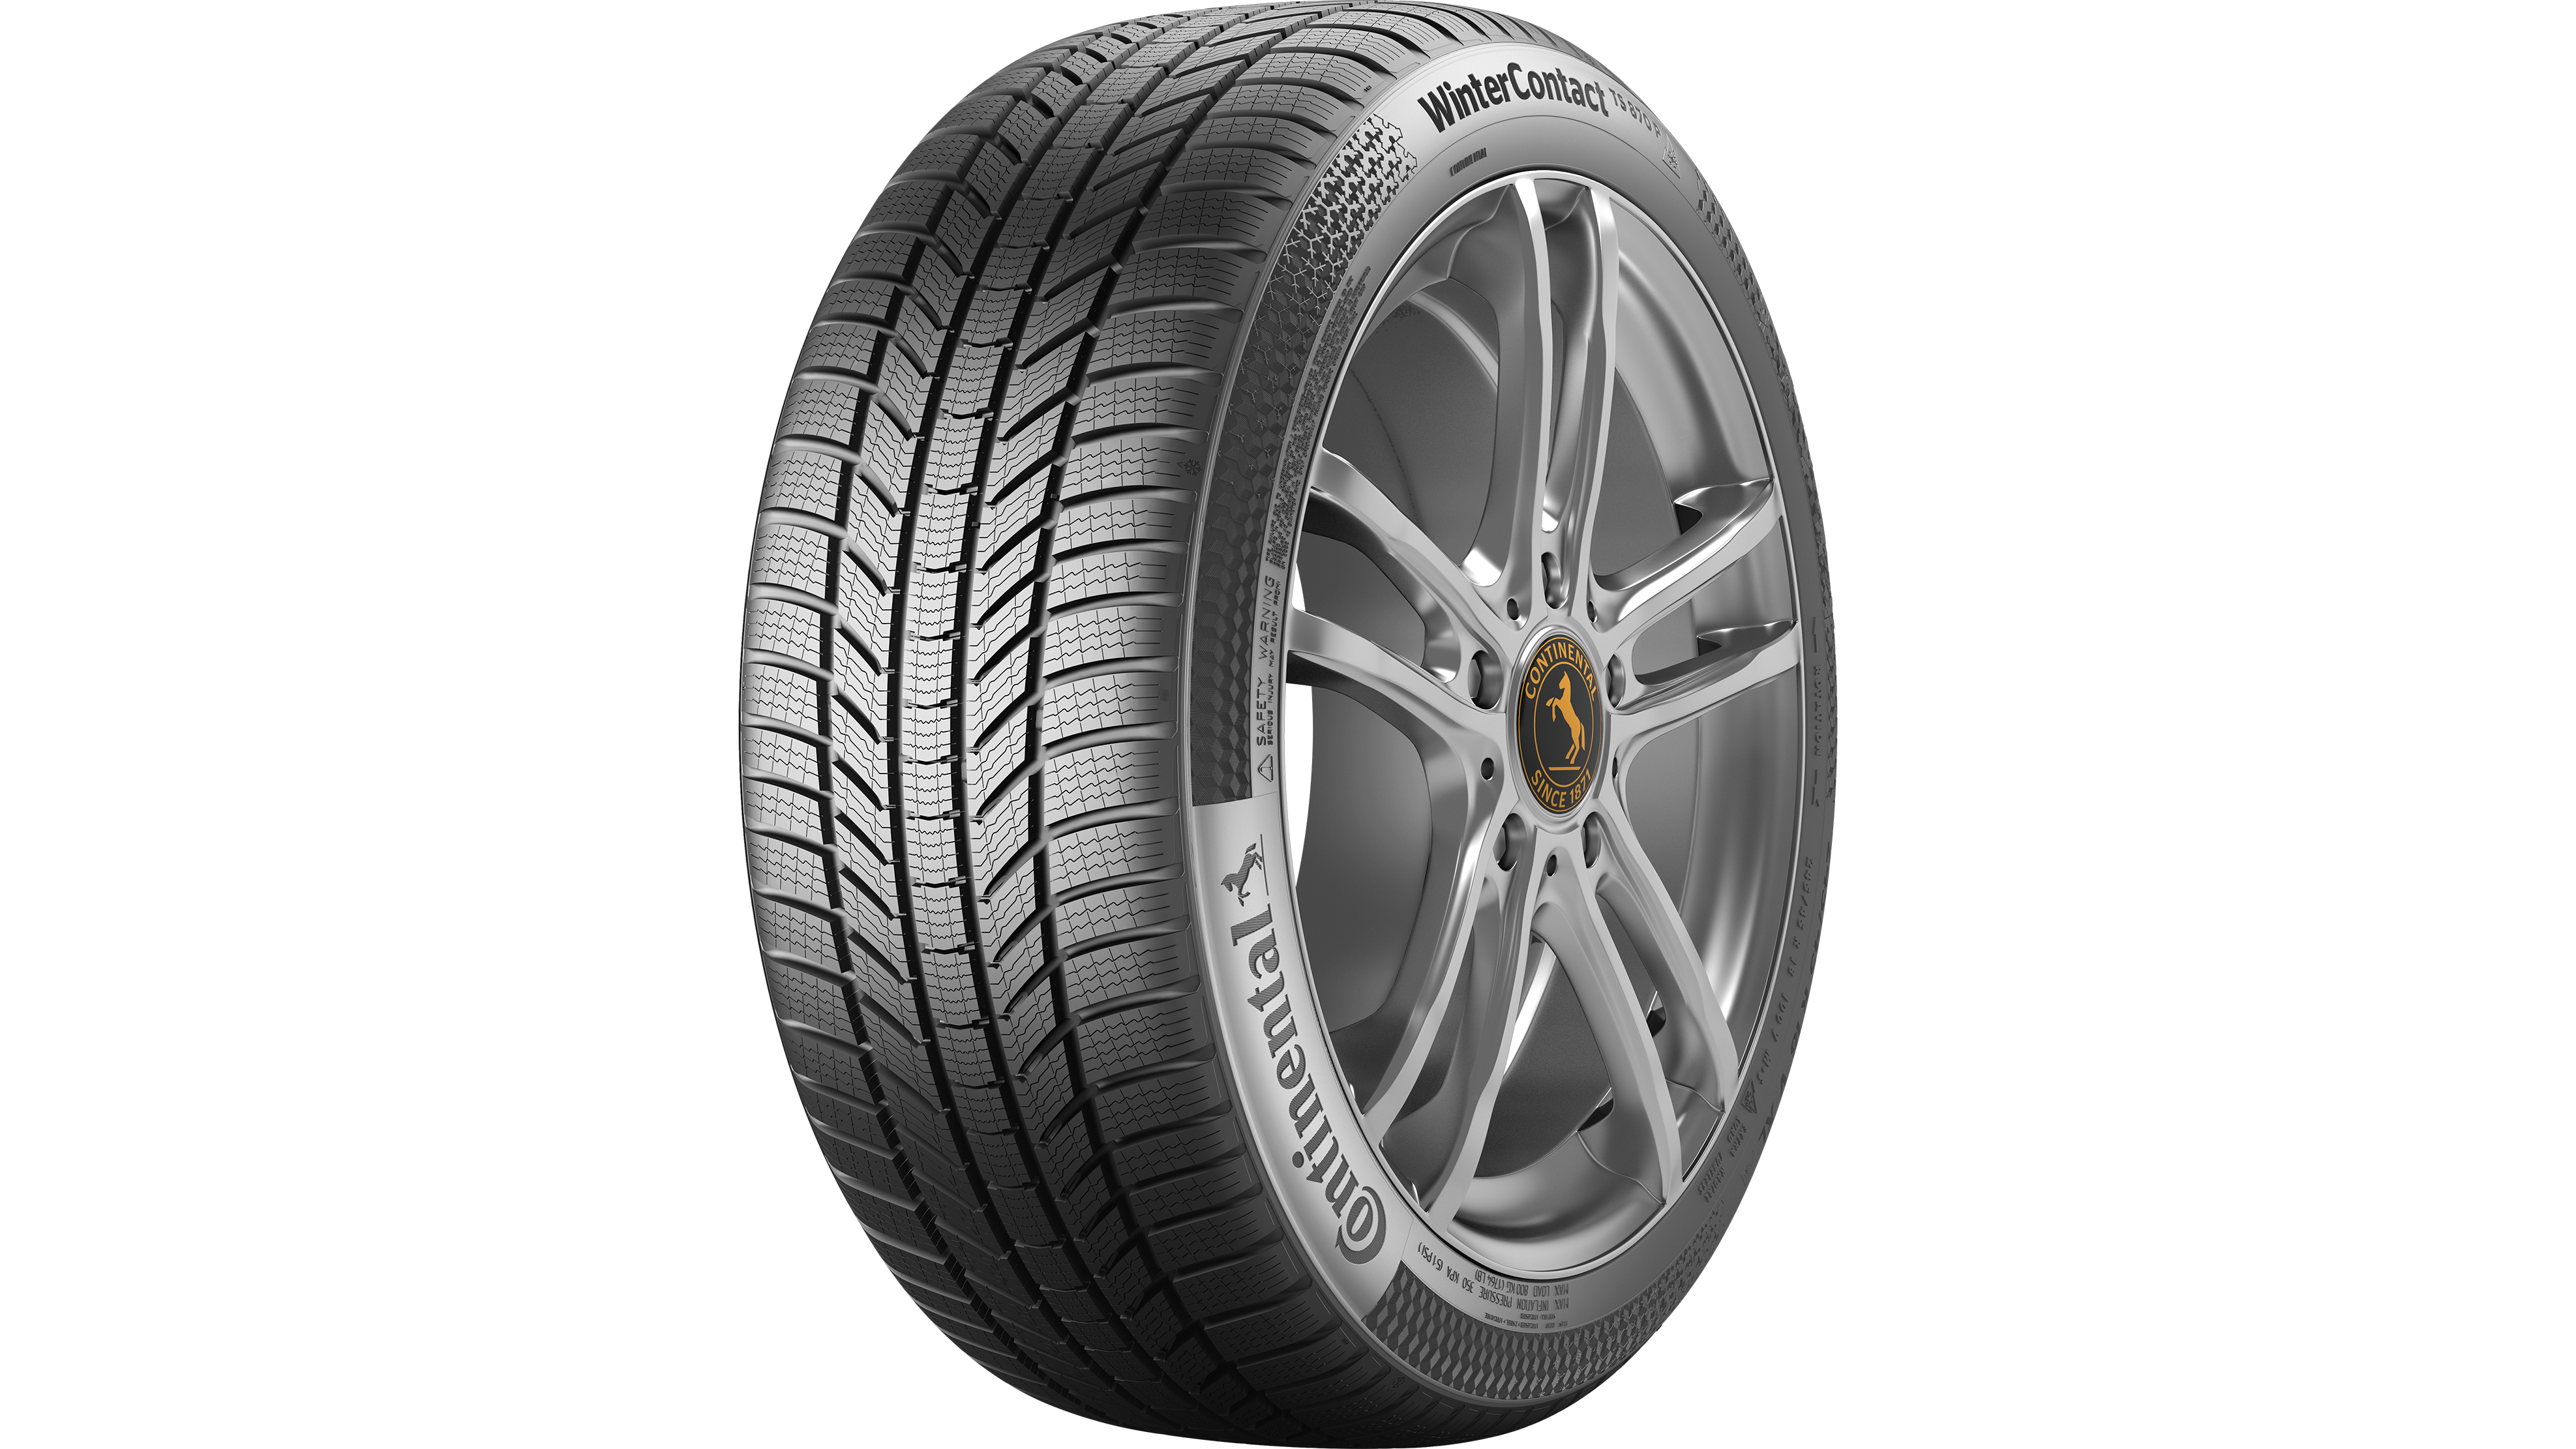 Continental with Top - 2023 ADAC Tire AG Winter Rating Test in Continental